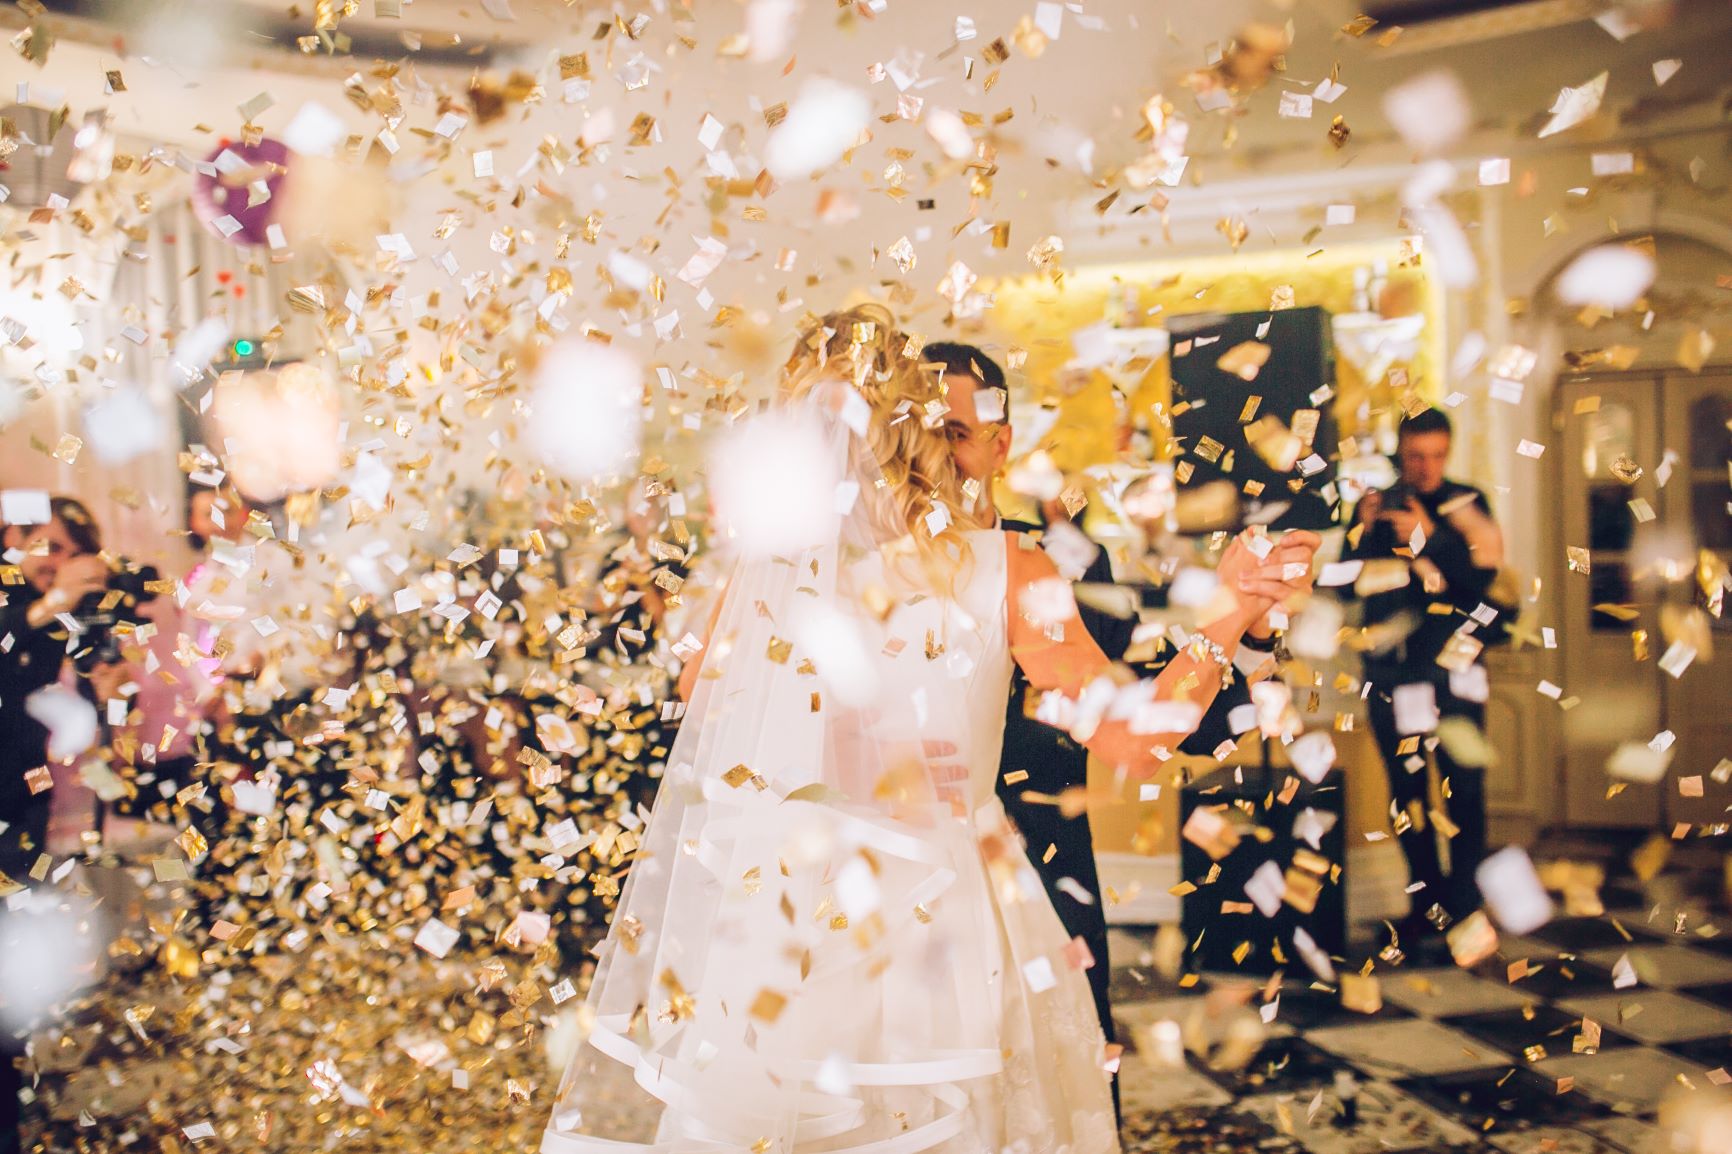 Confetti falling: Making the most of your wedding photos